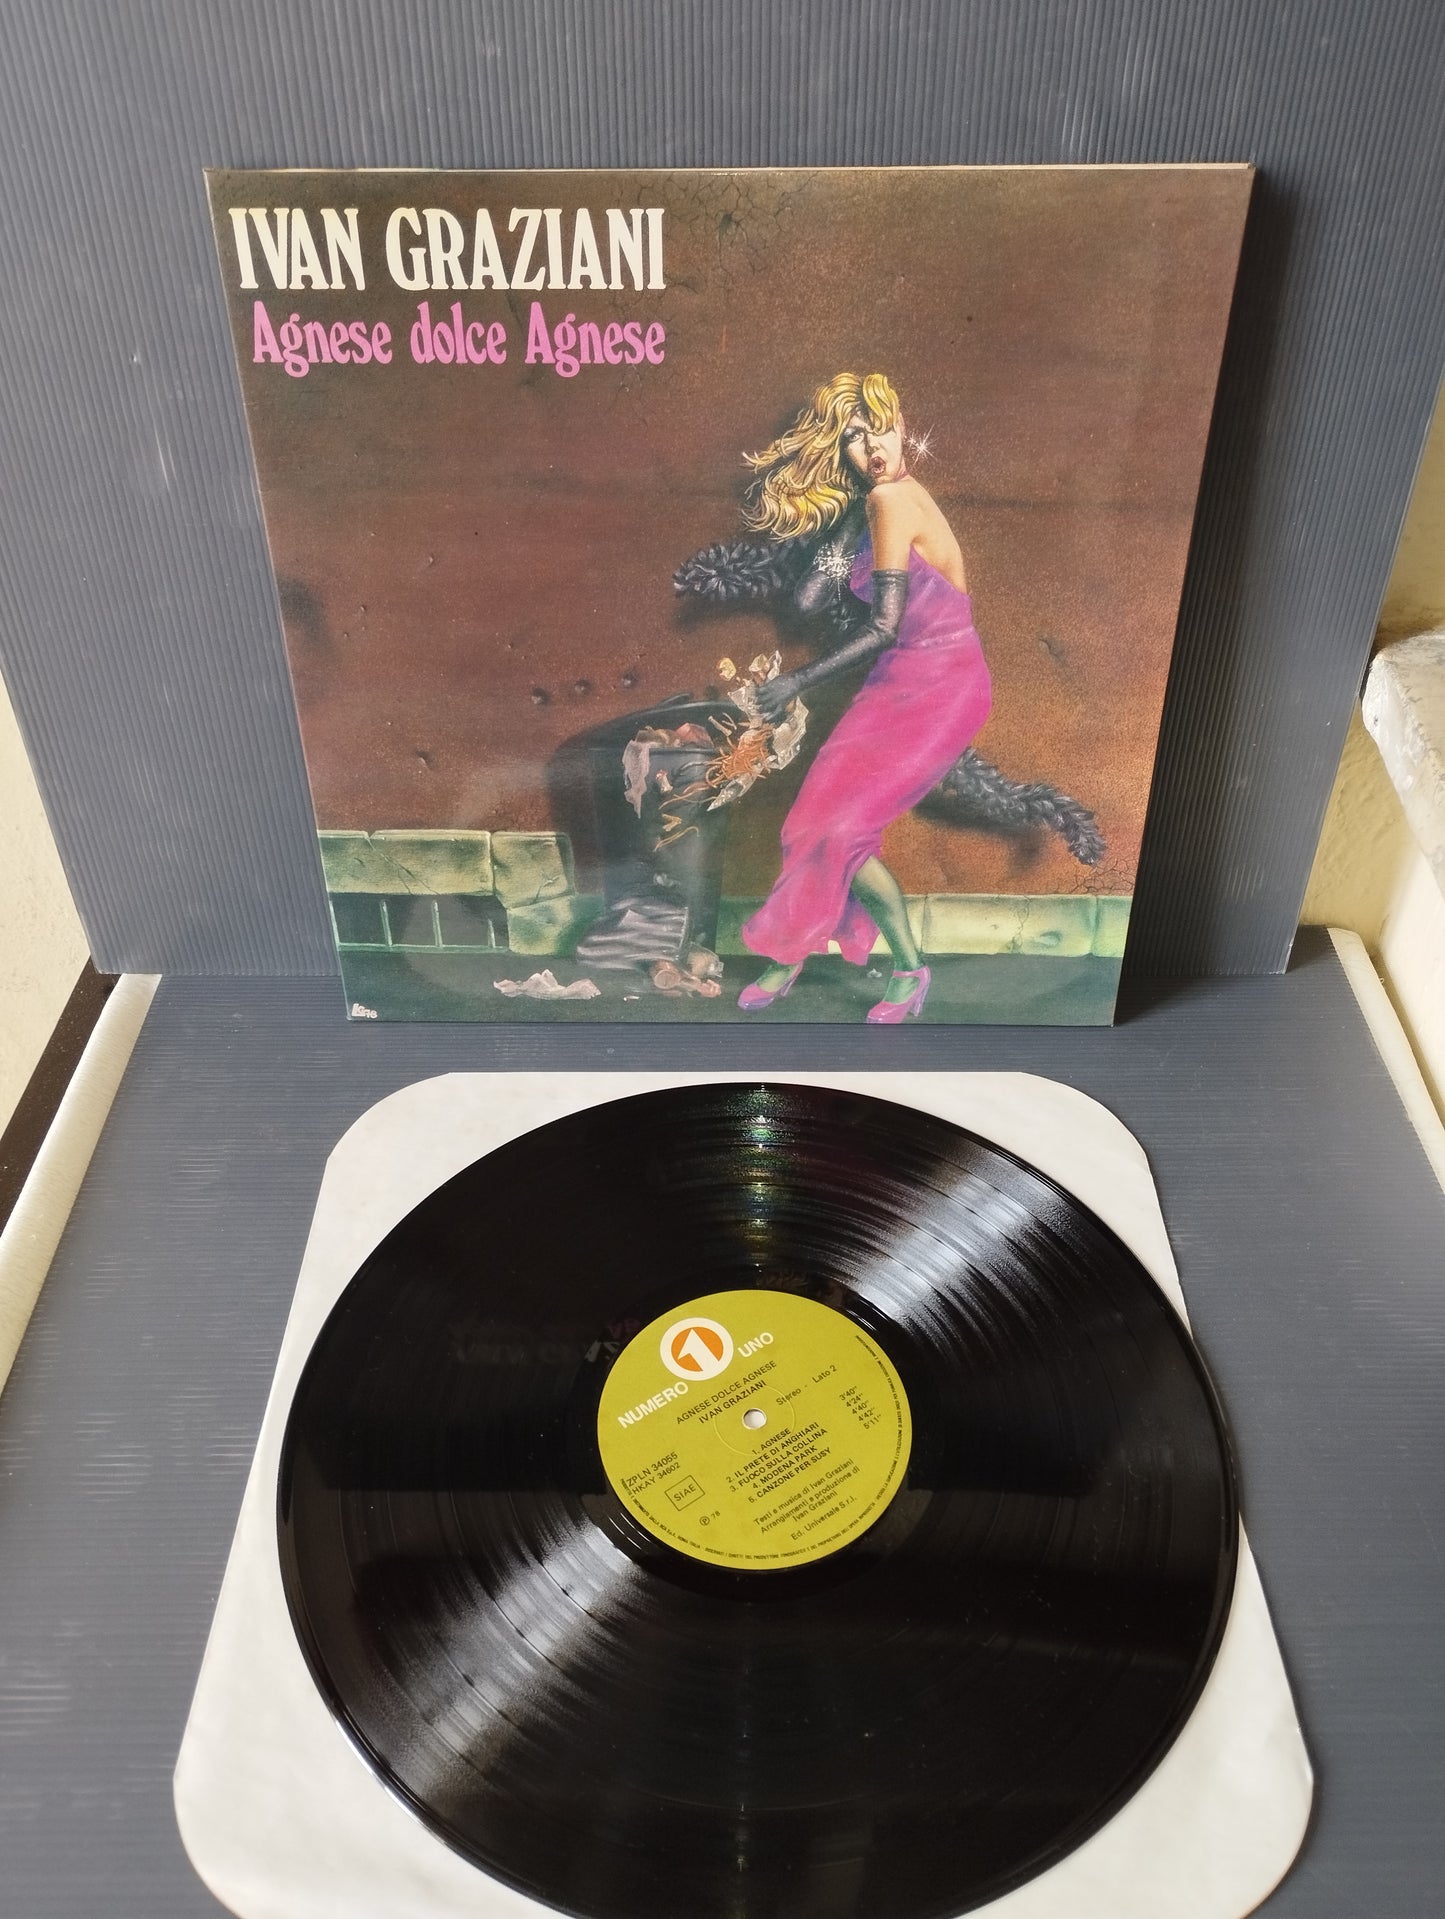 Agnese Dolce Agnese" Ivan Graziani Lp 33 Laps

 Published in 1978 by Numero Uno code ZPLN 34055